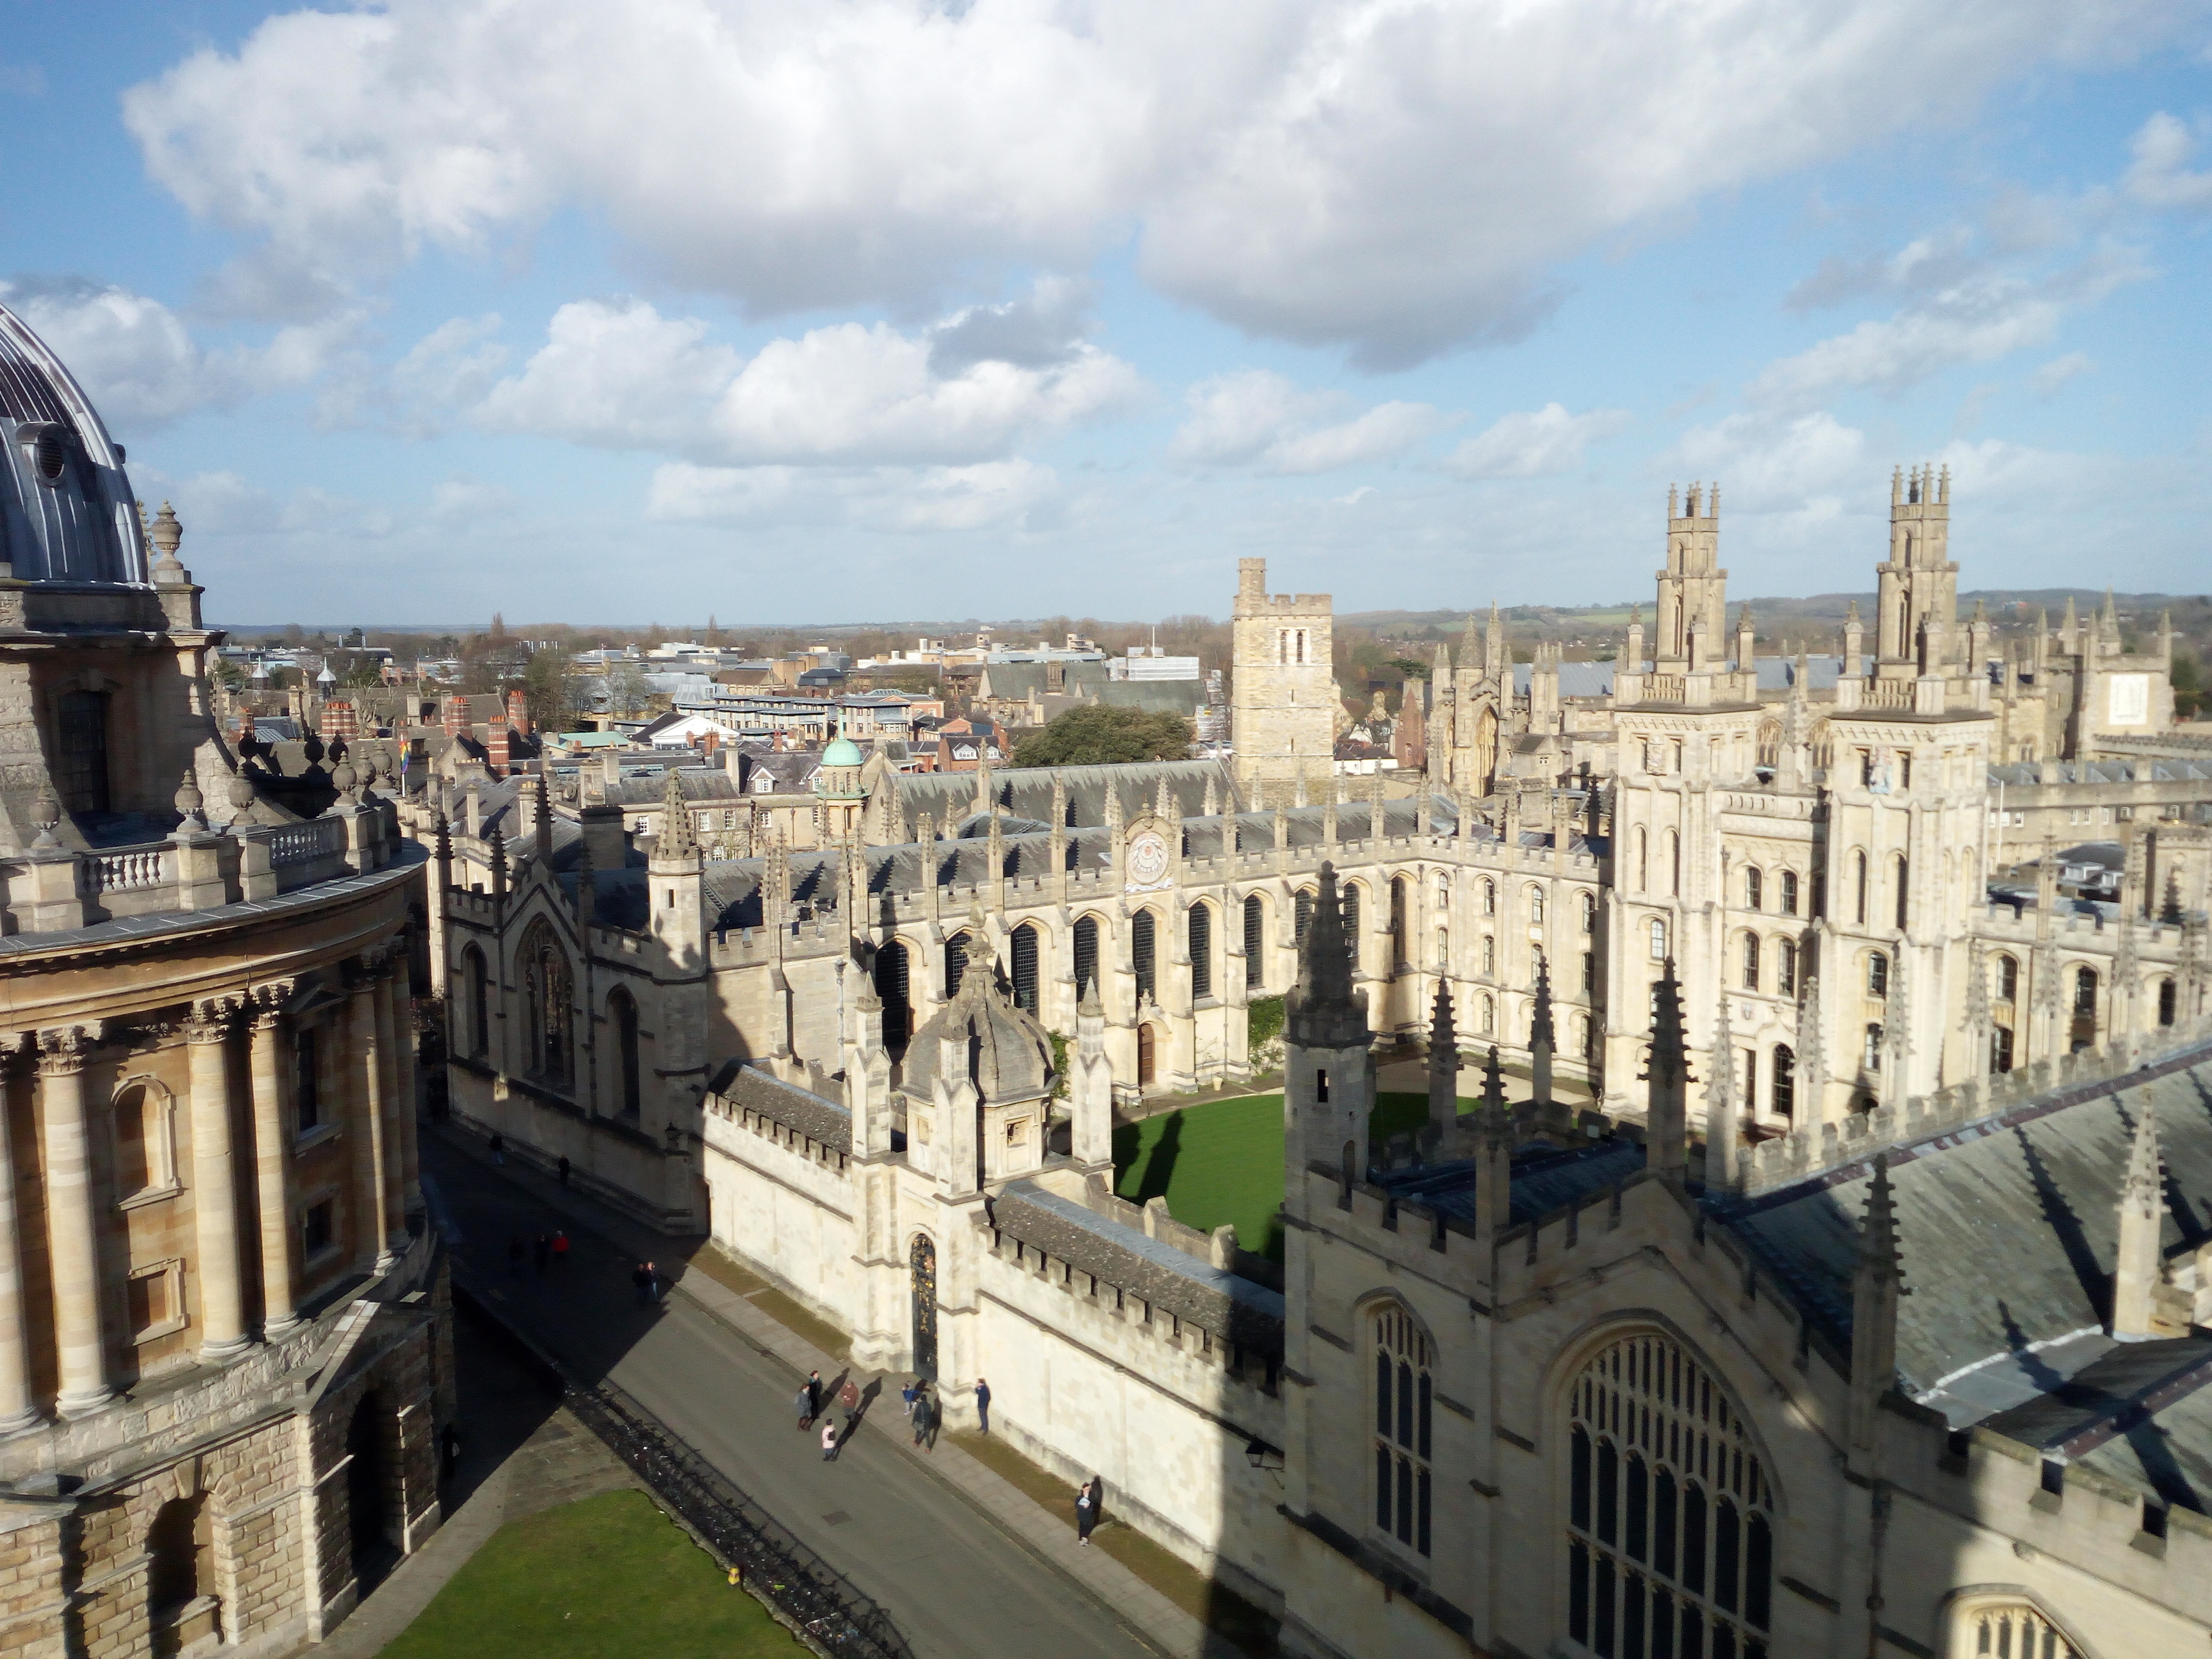 View from the Tower of the University Church of St. Mary the Virgin - Oxford